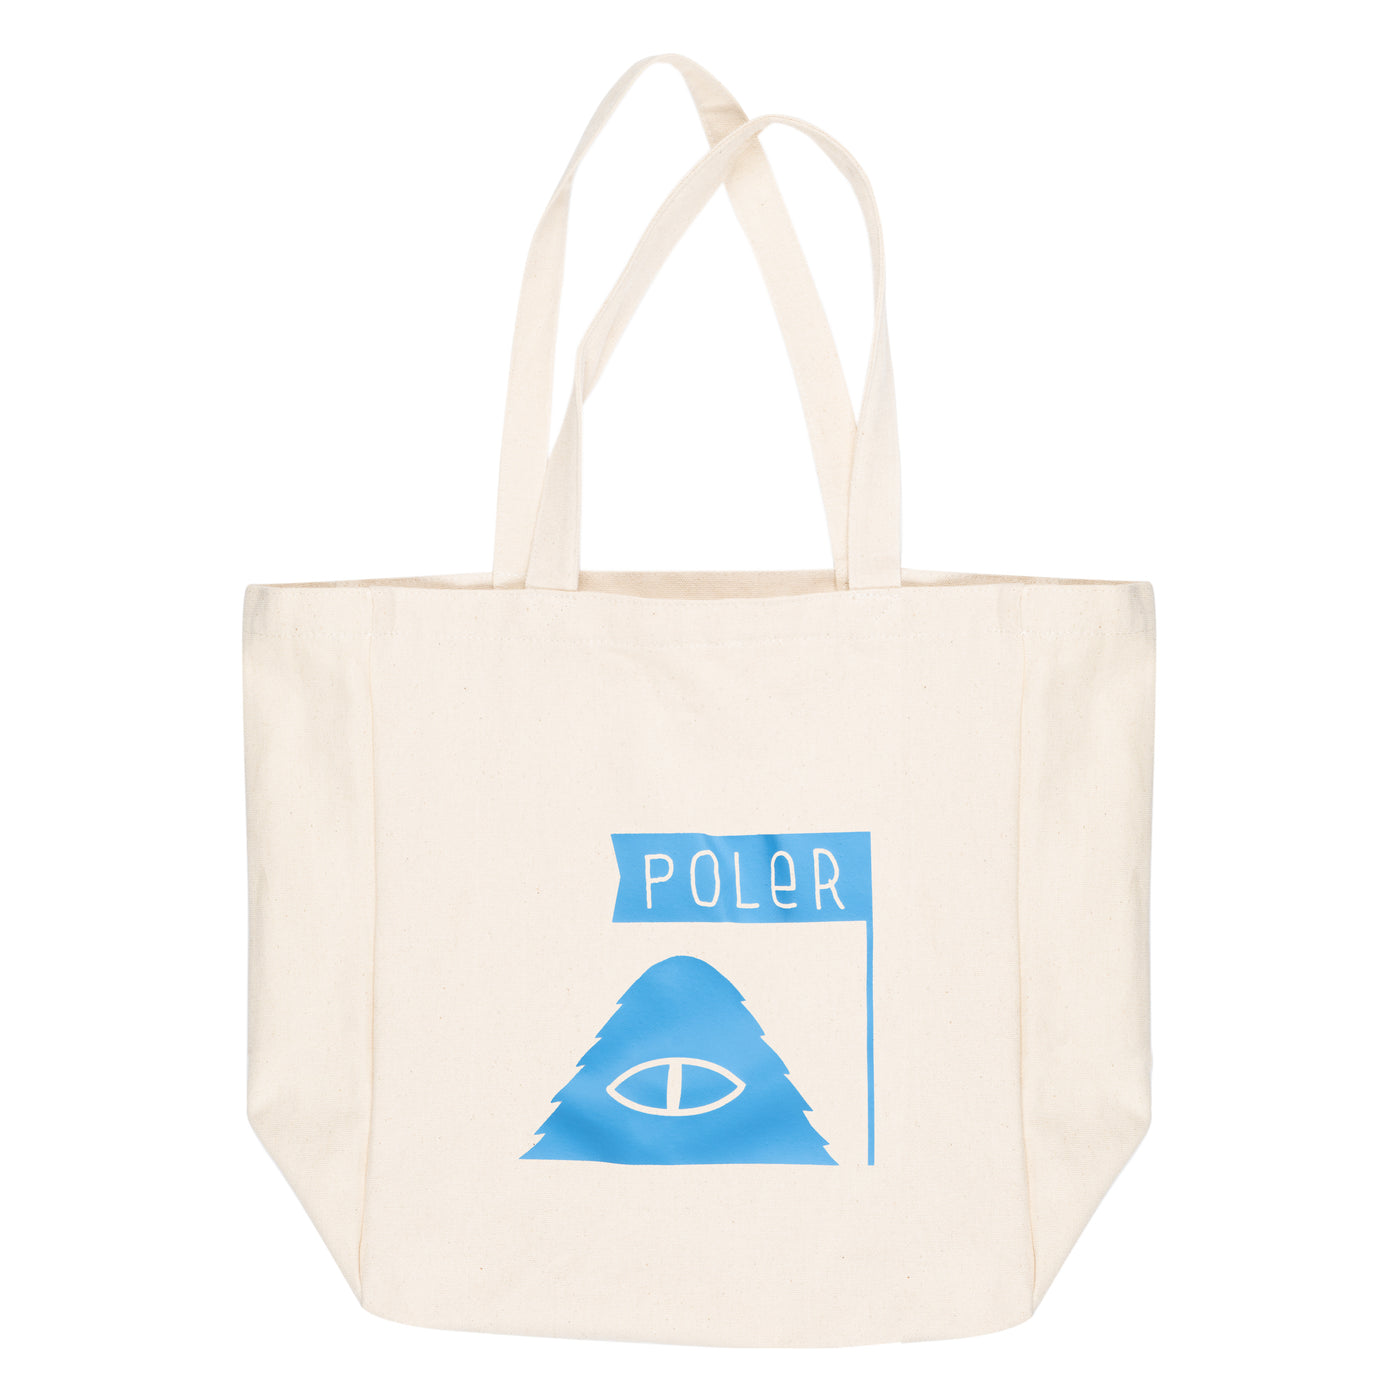 Tote product   